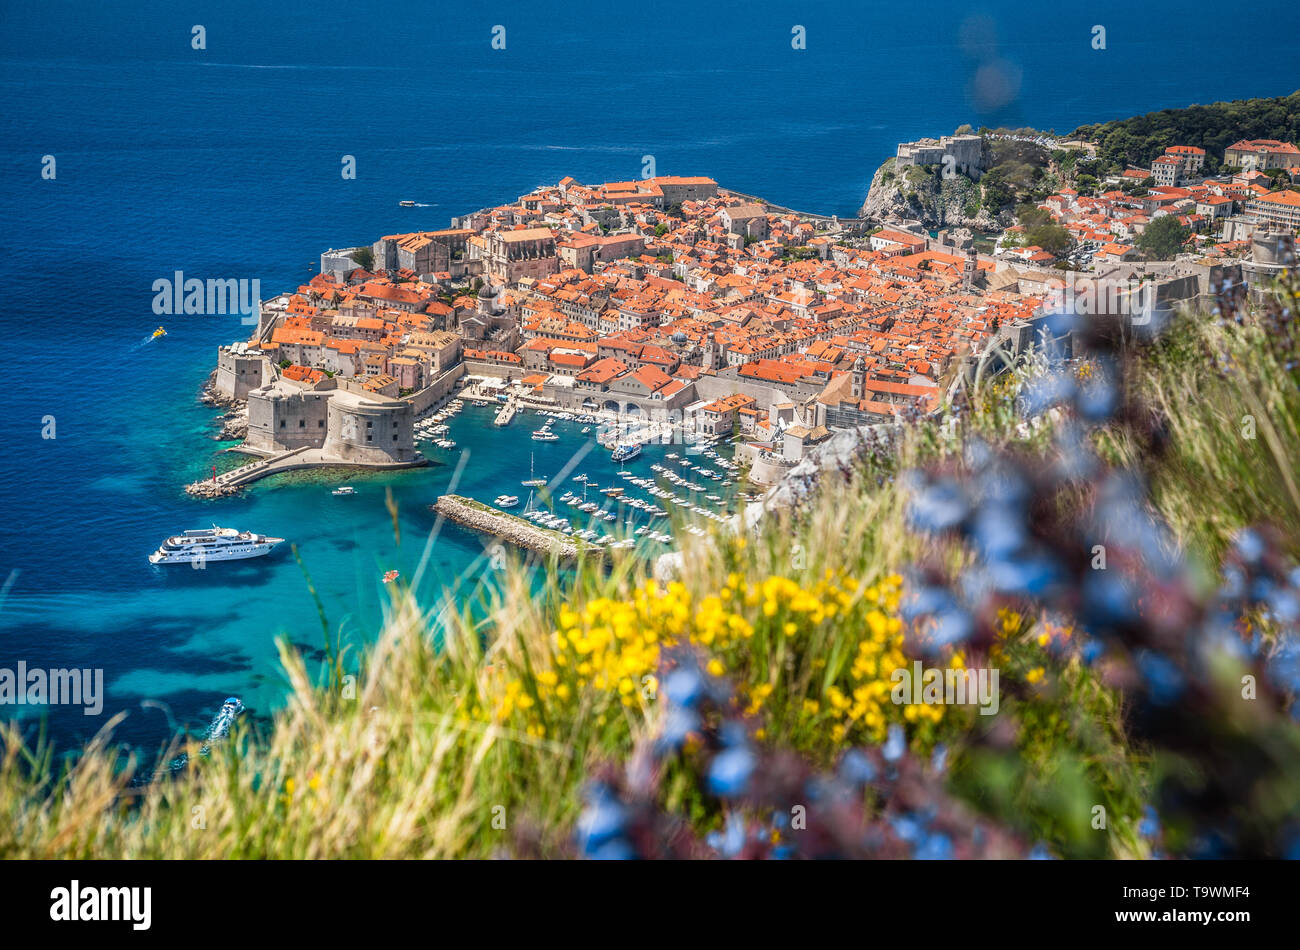 Panoramic aerial view of the historic town of Dubrovnik, one of the most famous tourist destinations in the Mediterranean Sea, from Srt mountain on a  Stock Photo